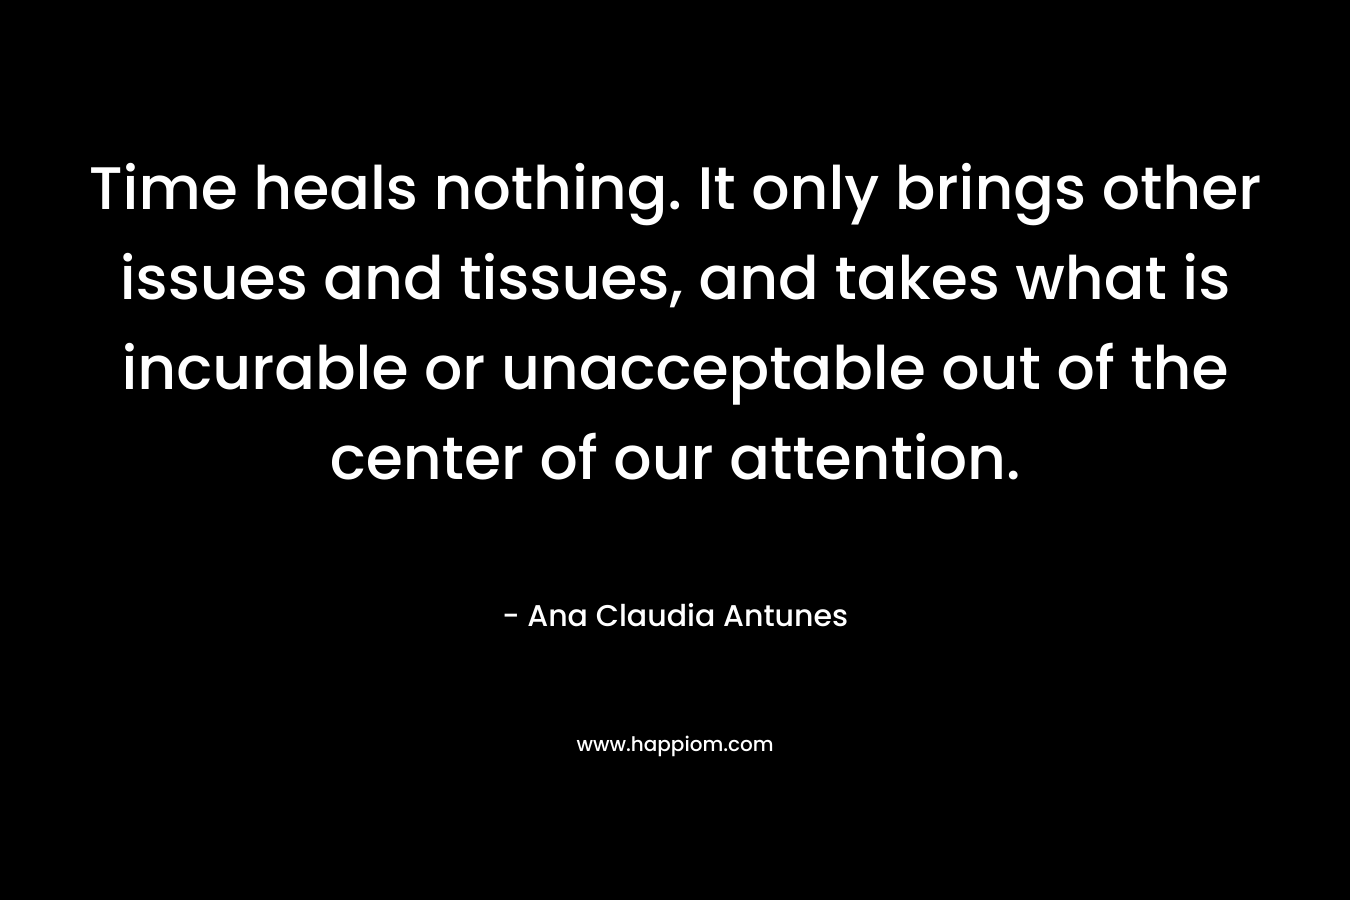 Time heals nothing. It only brings other issues and tissues, and takes what is incurable or unacceptable out of the center of our attention. – Ana Claudia Antunes